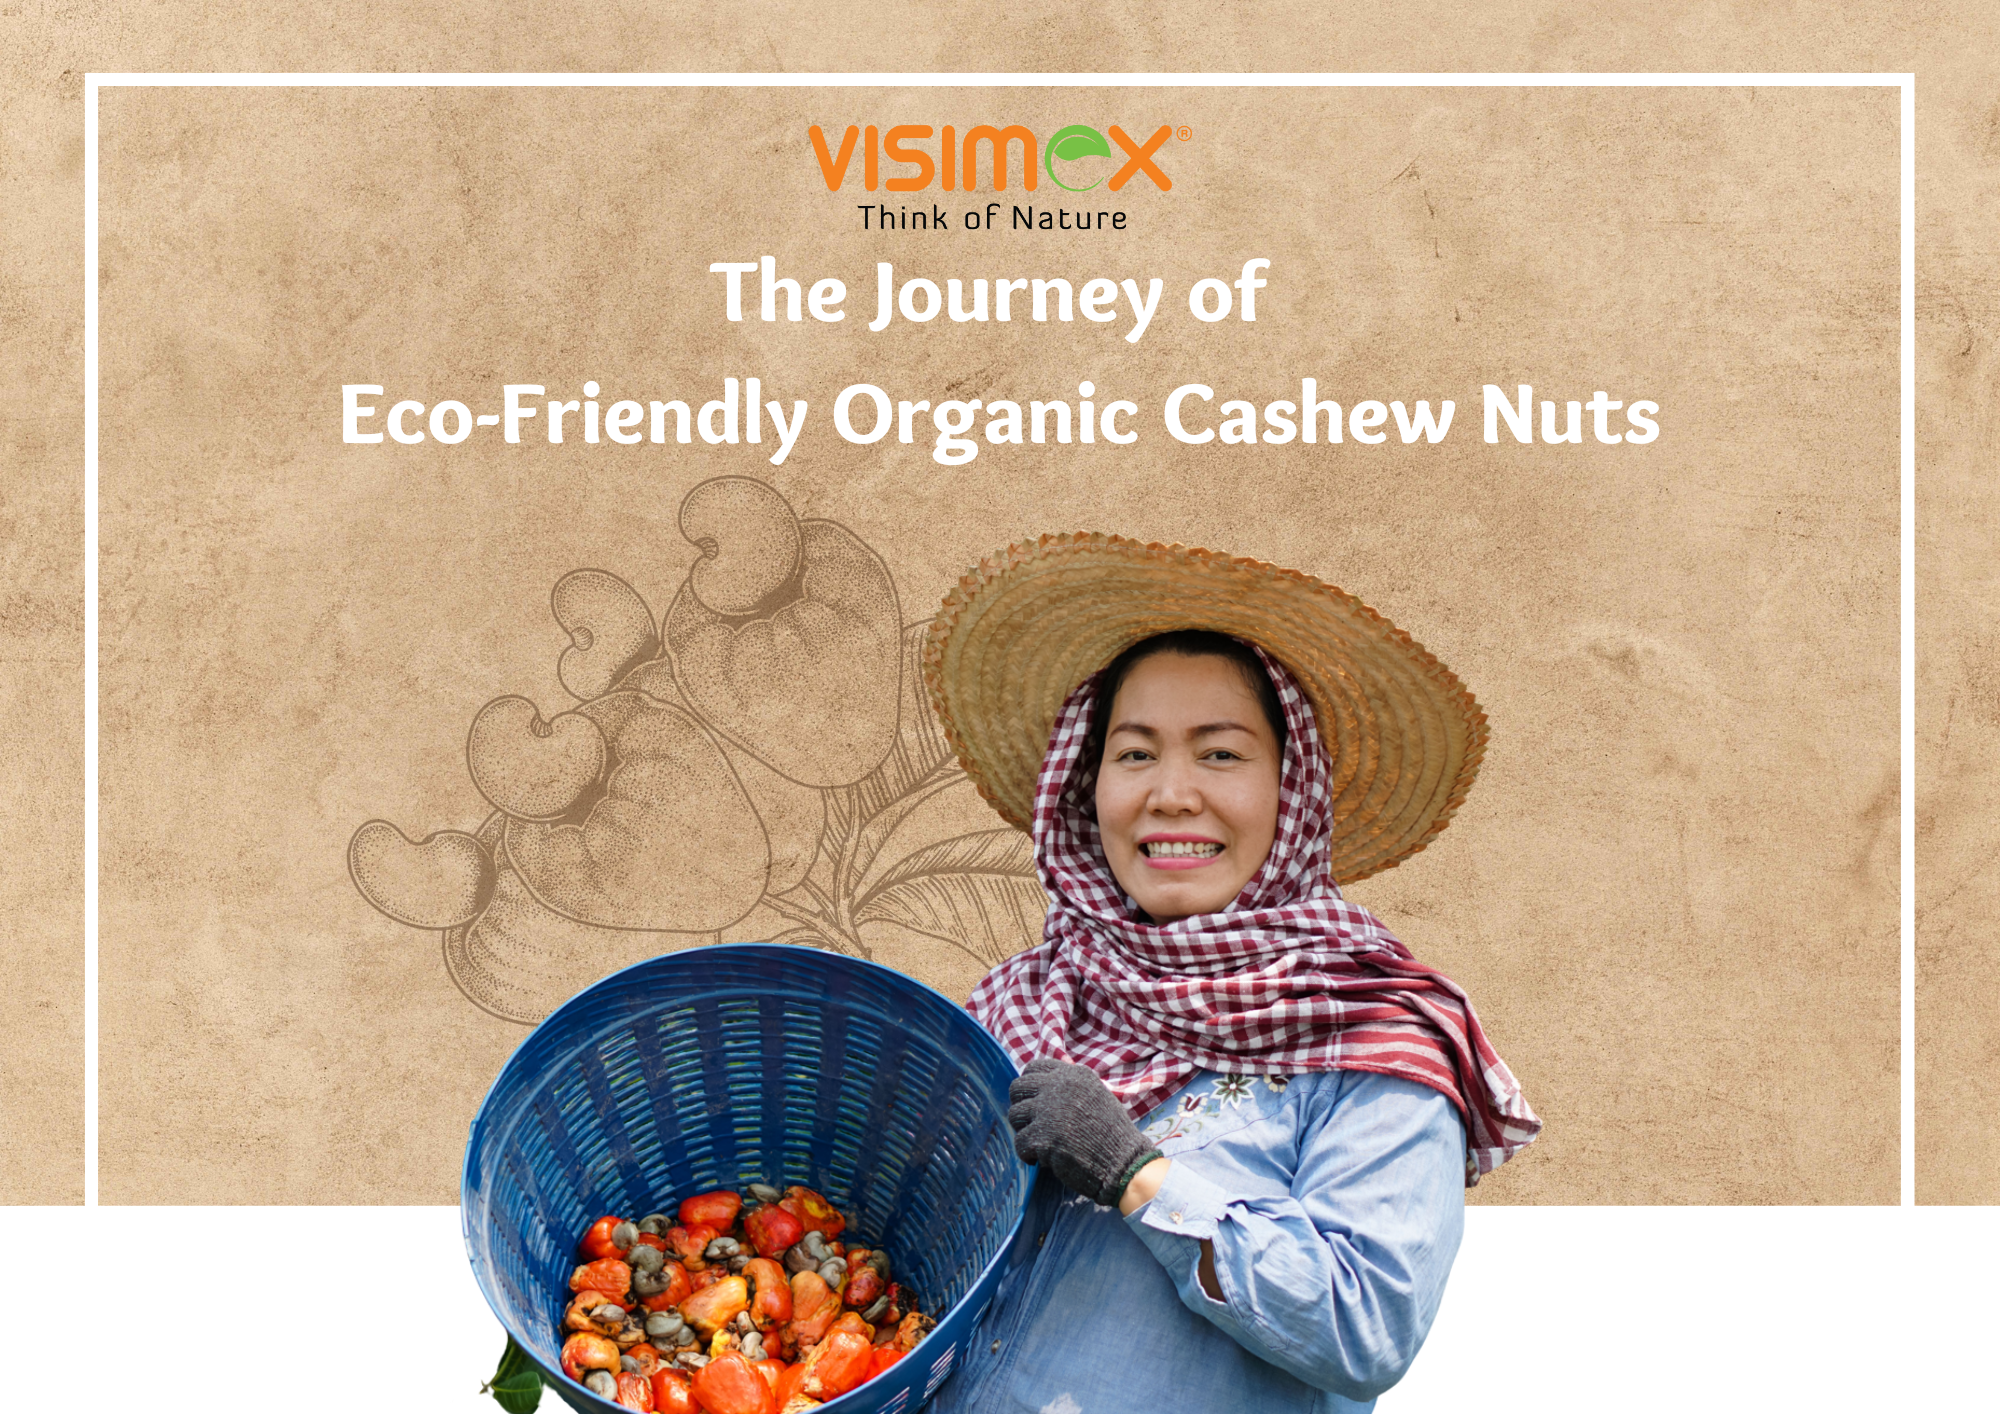 From Farm to Table: The Journey of Eco-Friendly Organic Cashew Nuts